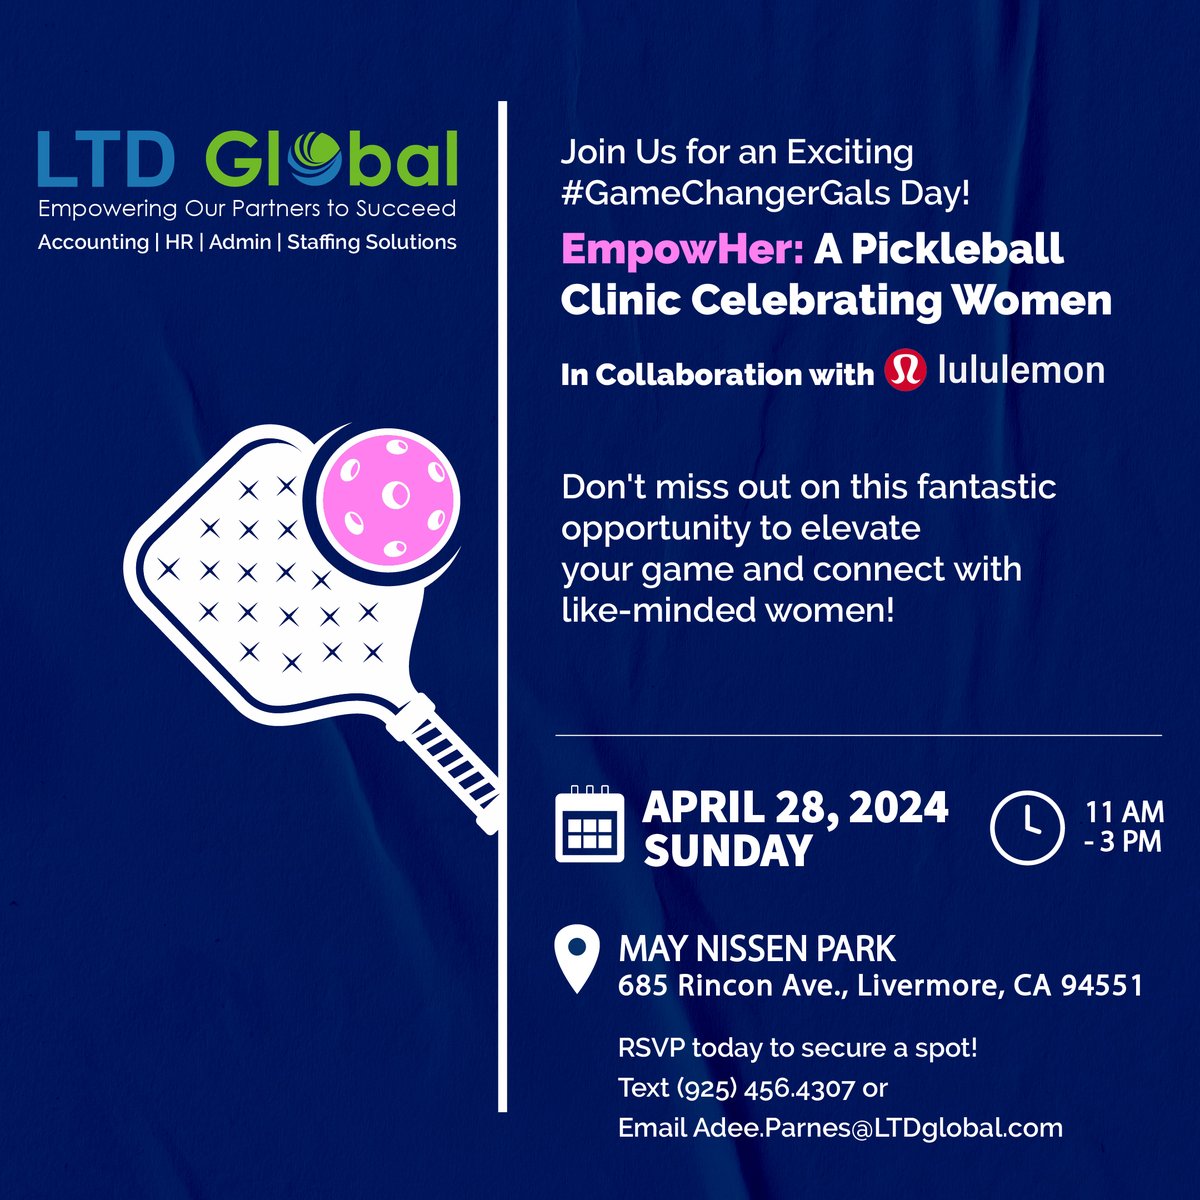 Event alert! We, in collaboration with @lululemon, are hosting 'EmpowHer: A Pickleball Clinic Celebrating Women' on April 28. See the details below and don't forget to RSVP today to secure a spot! #WomenOwned #BayArea #CommunityEvent